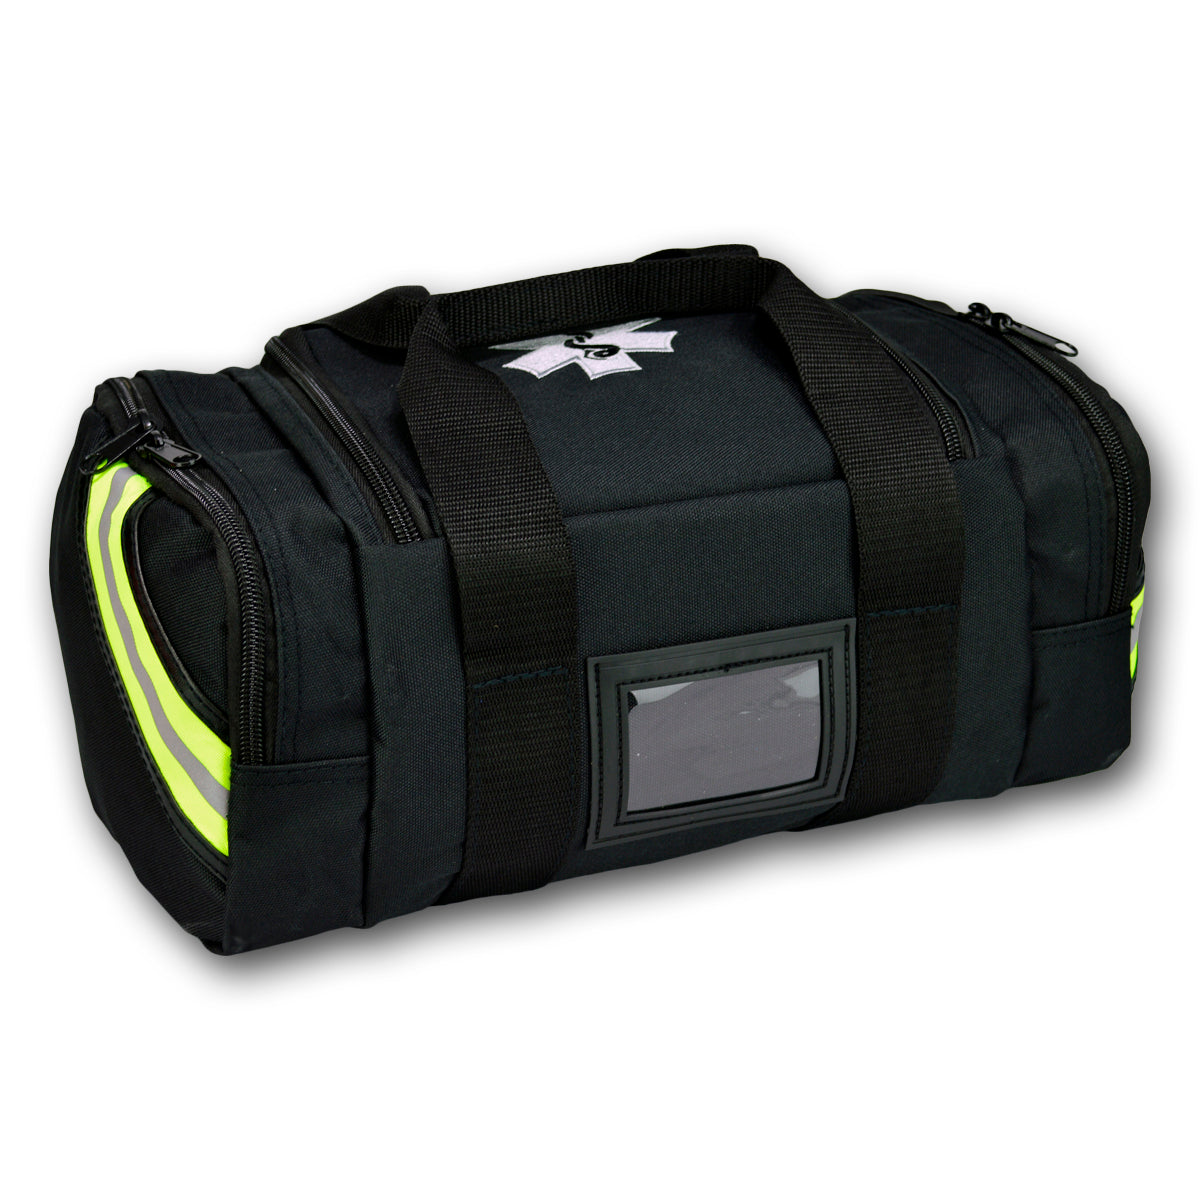 Lightning X Compact Trauma Bag (LXMB10) | The Fire Center | The Fire Store | Store | FREE SHIPPING | The LXMB10 is our most compact first responder bag. It holds the same standard fill kit as our LXMB20, but with a more streamlined fit and value minded design. The bag consists of a main hold with customizable dividers, a storage flap with 6 elastic tool loops, and two full length zippered side pockets.